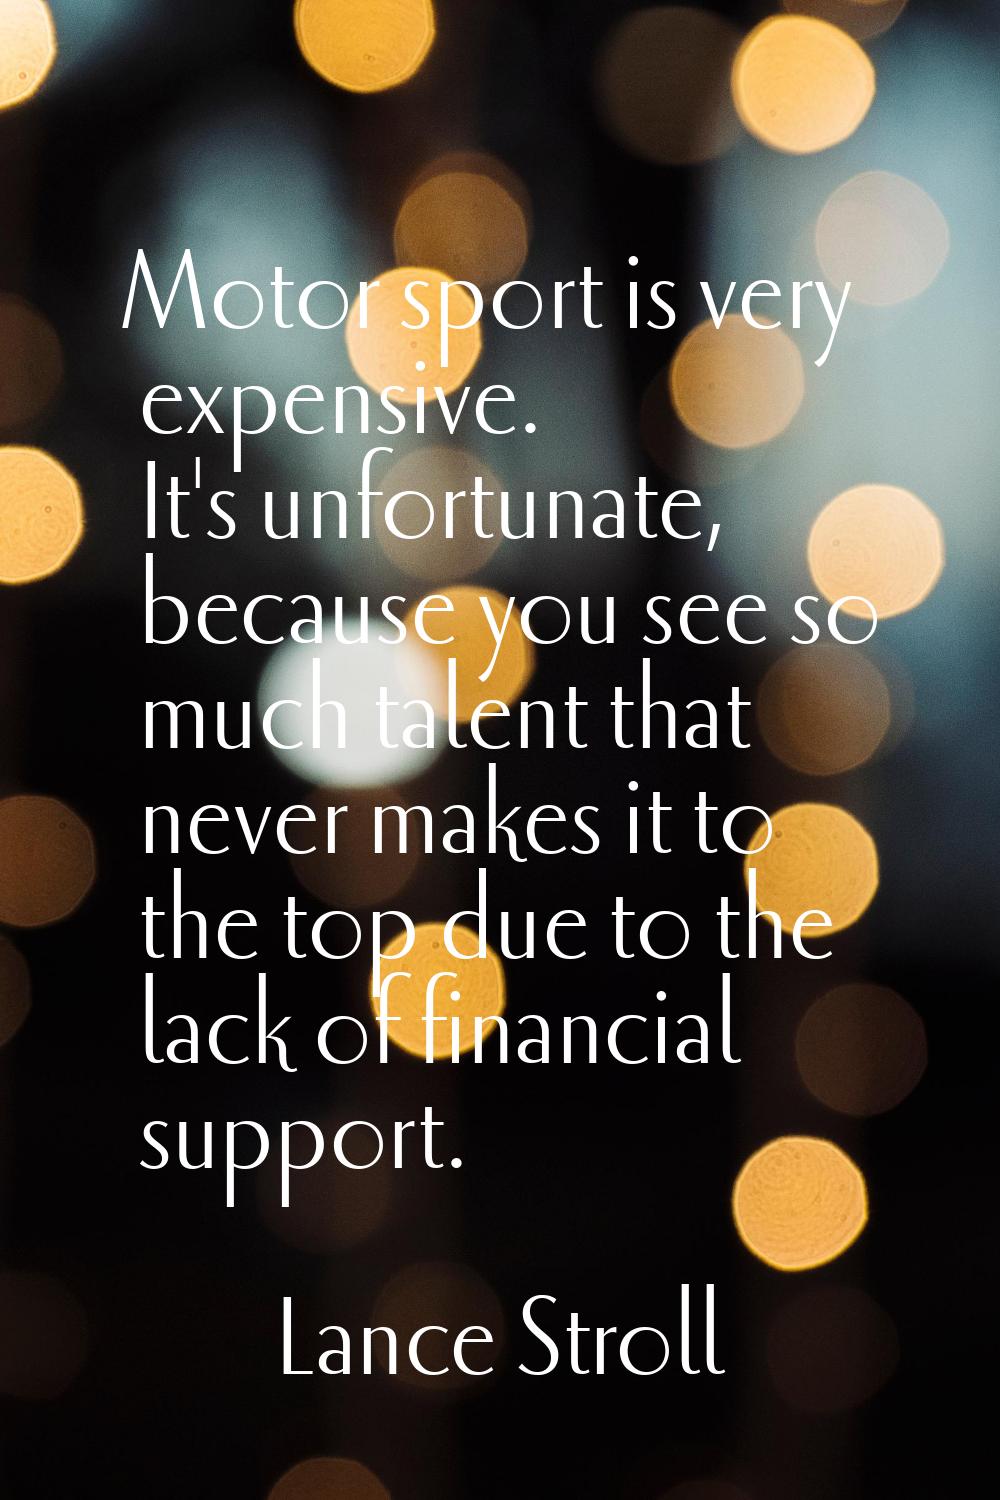 Motor sport is very expensive. It's unfortunate, because you see so much talent that never makes it